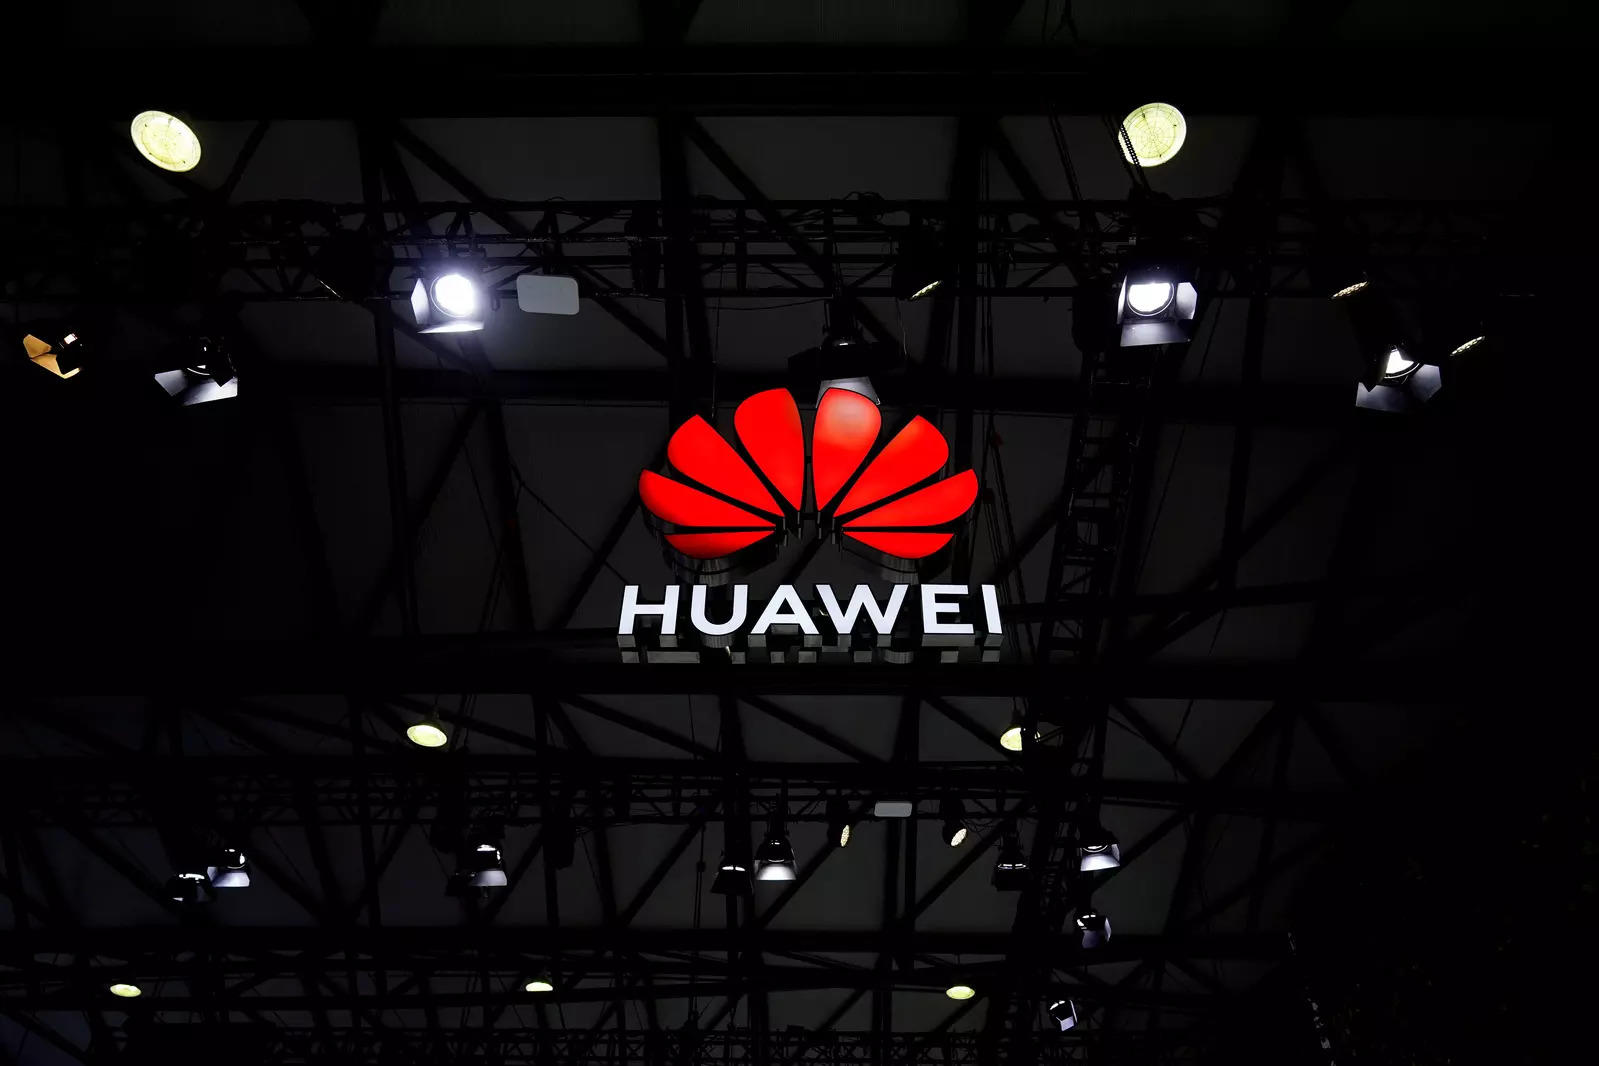 Germany ups reliance on Huawei for 5G despite security fears